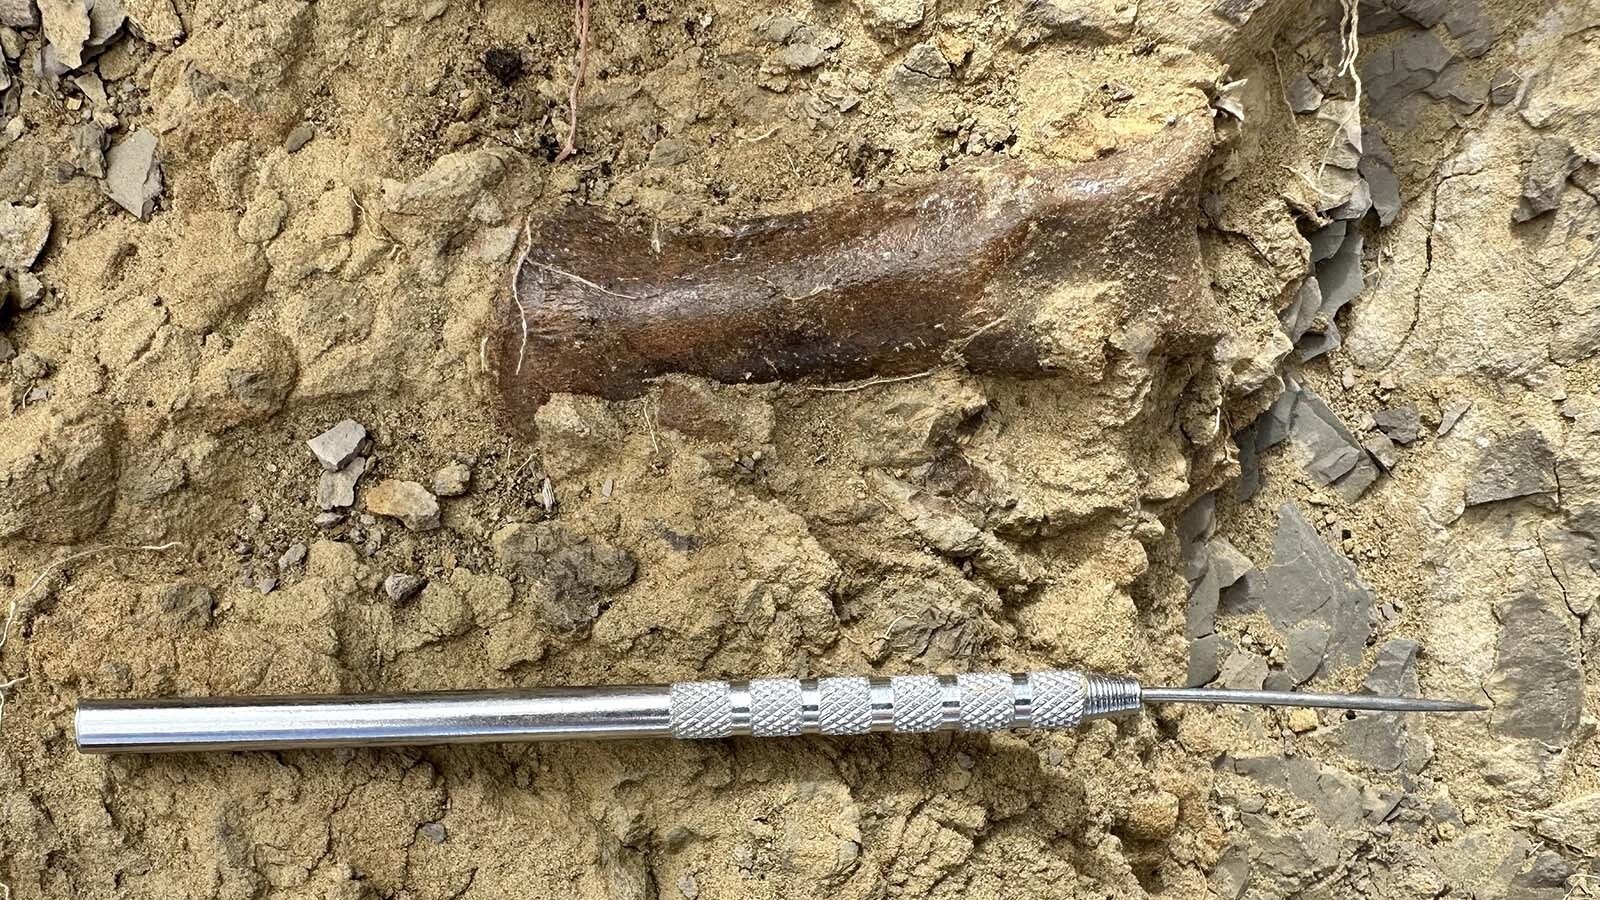 A dinosaur bone in Site B.22.8 with a dental pick for scale. This fossil could be a carpal bone from the hand of a carnivorous dinosaur, but identifying fossils in the field is difficult.